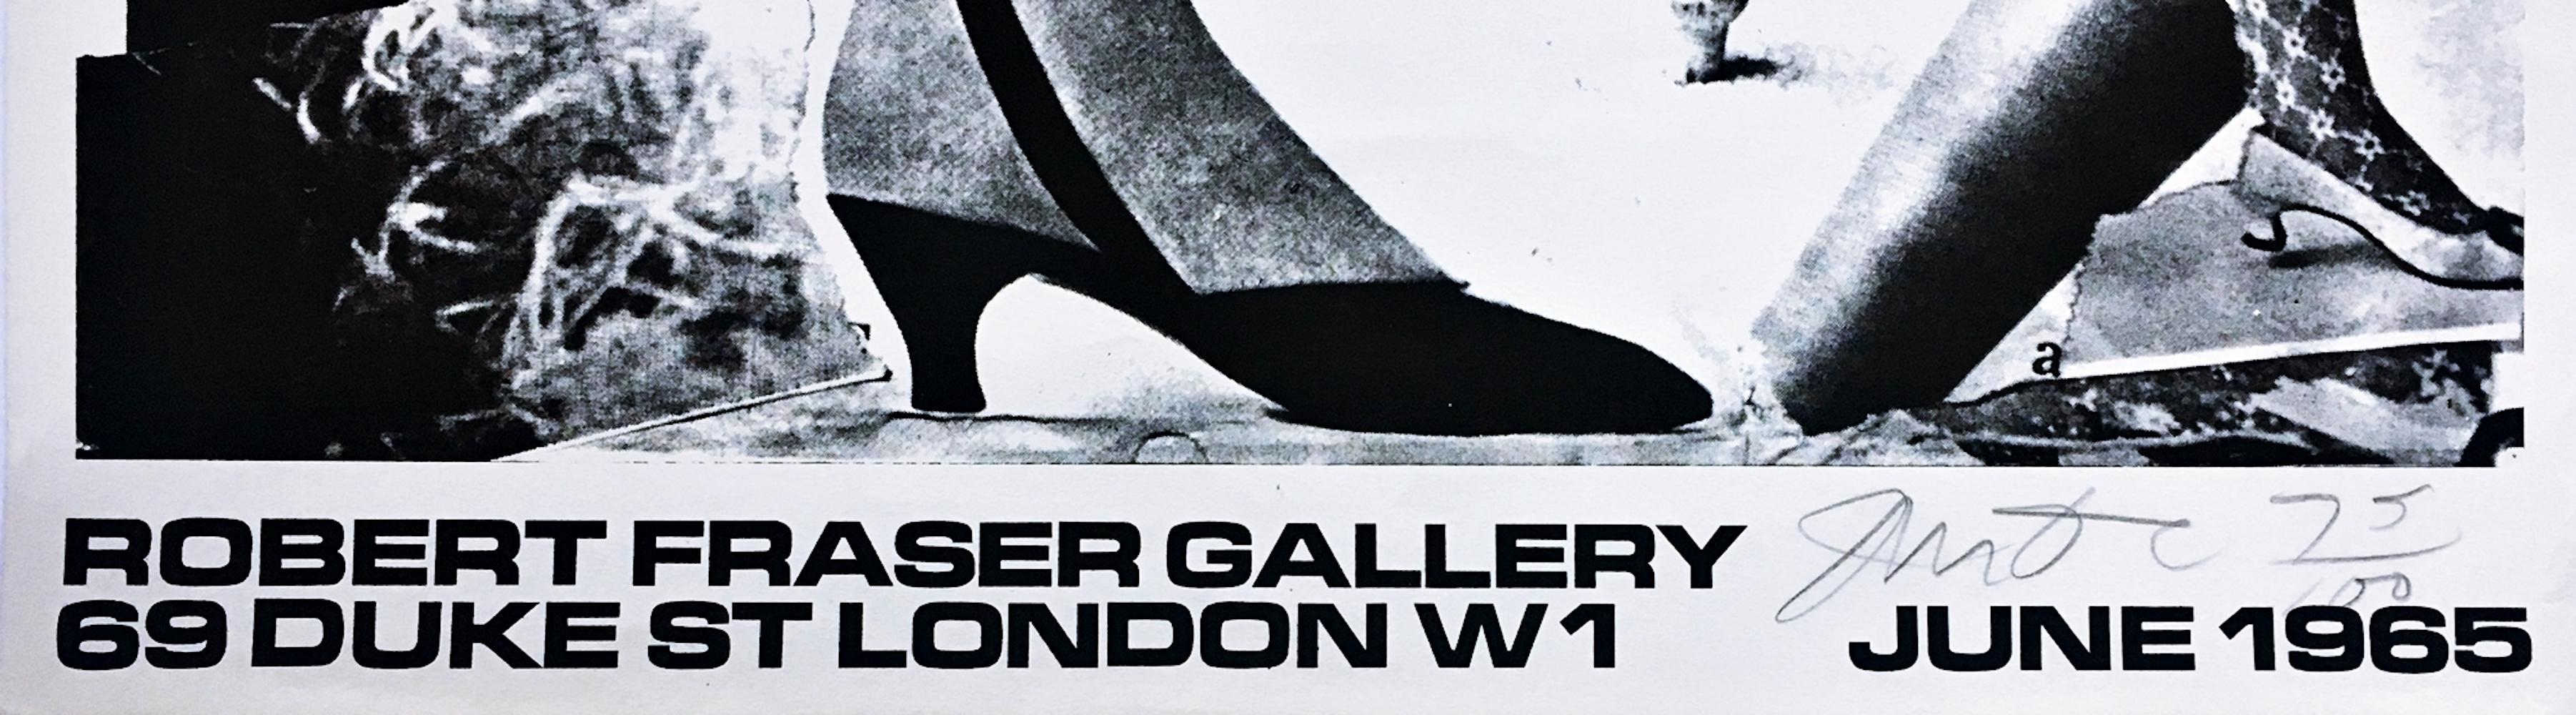 The Robert Fraser Gallery Print (famous Deluxe Edition of the Swinging Sixties) For Sale 1